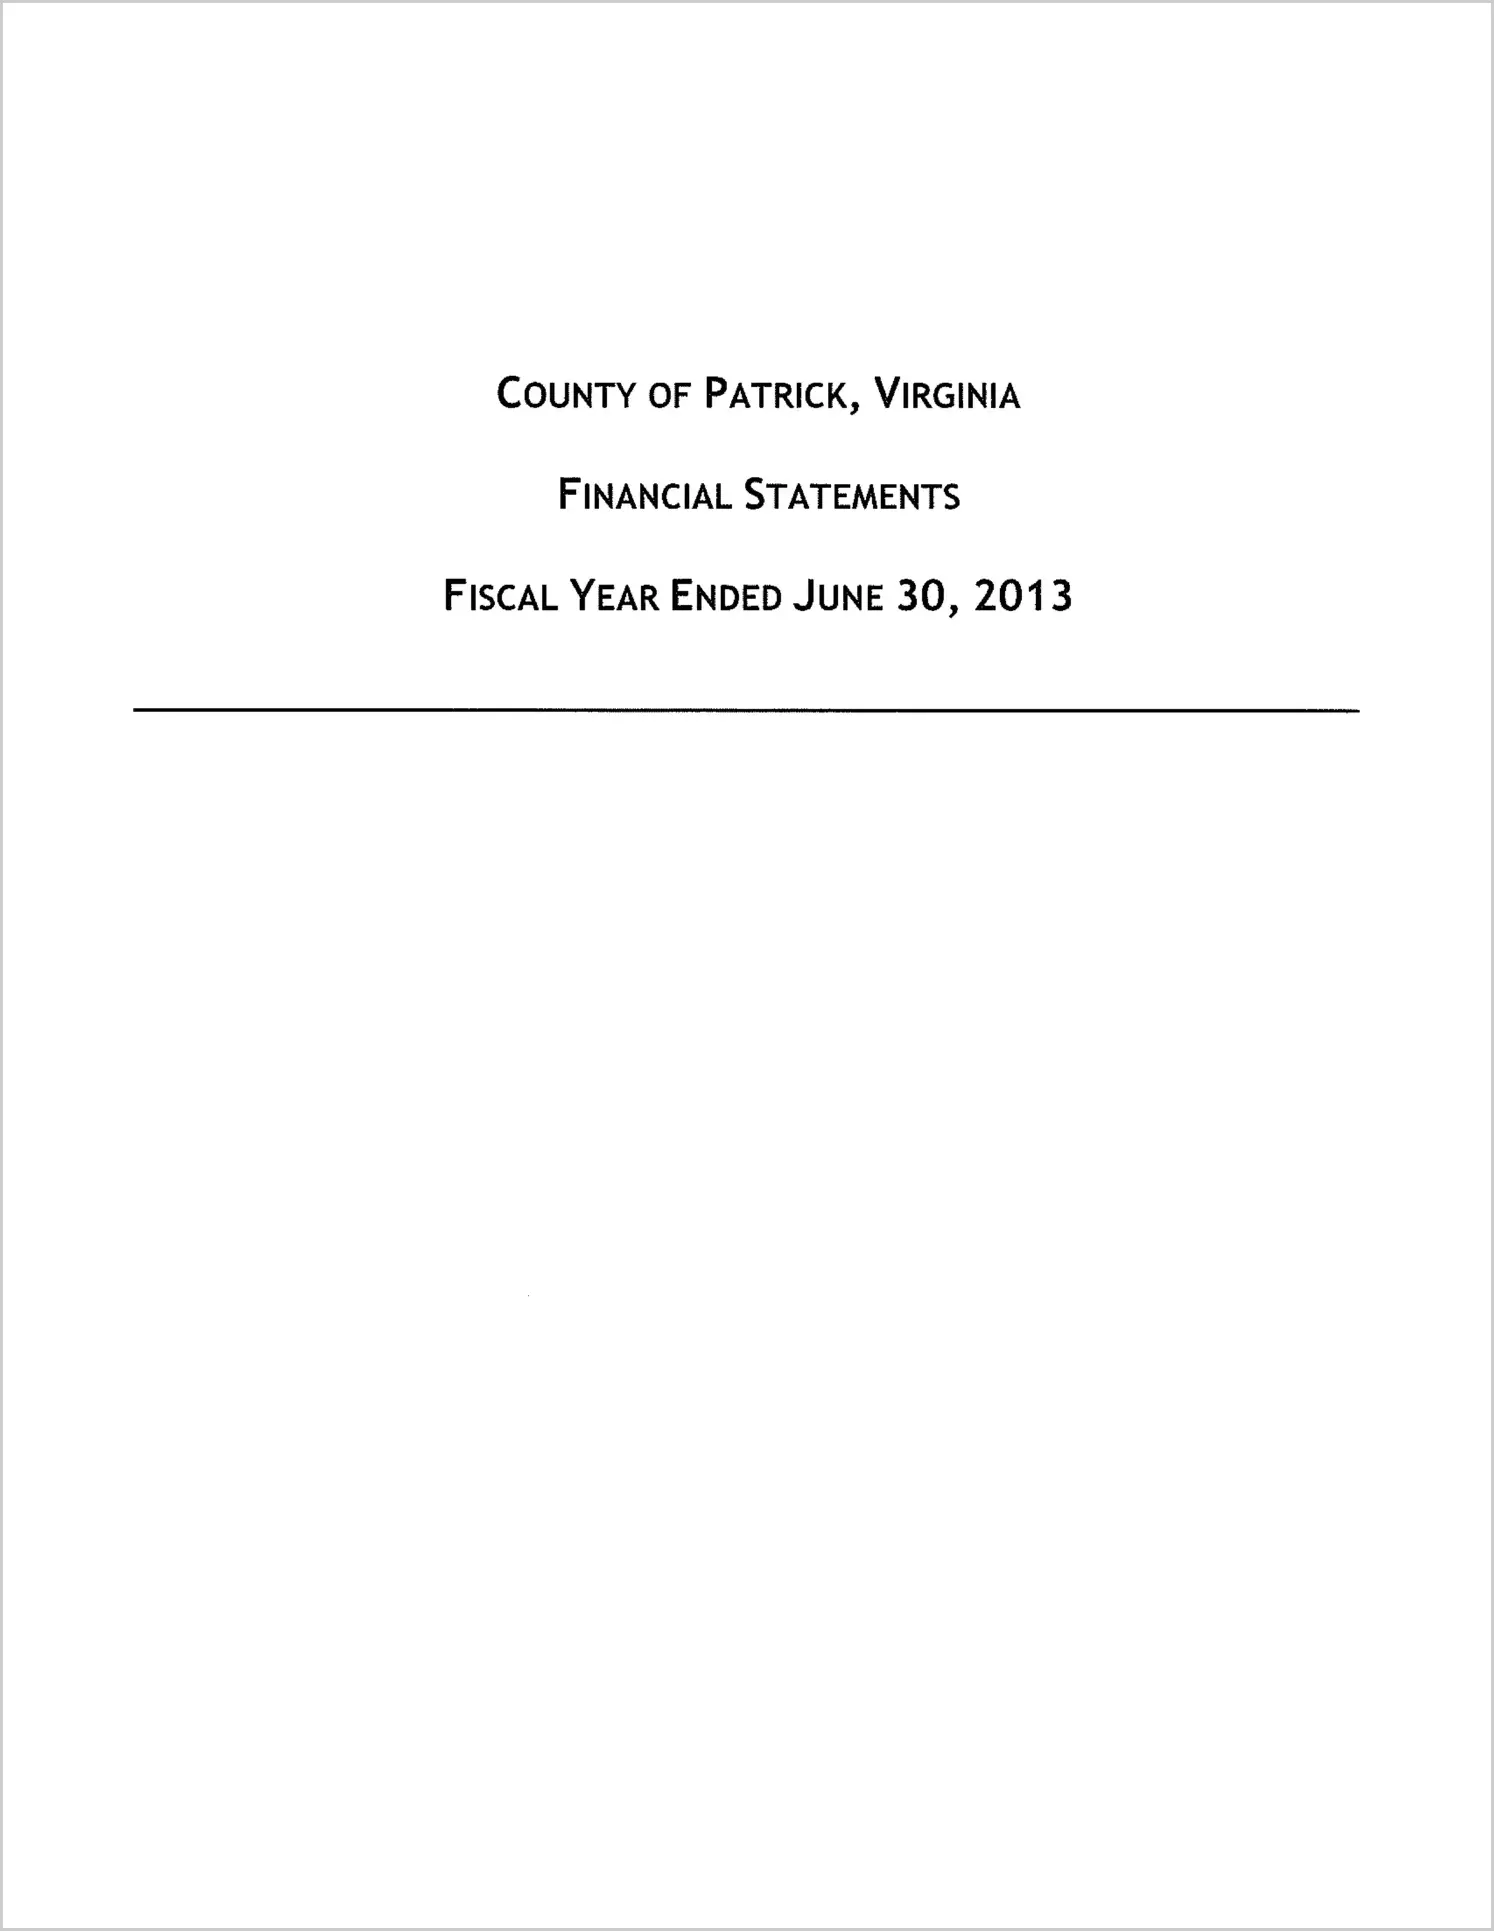 2013 Annual Financial Report for County of Patrick